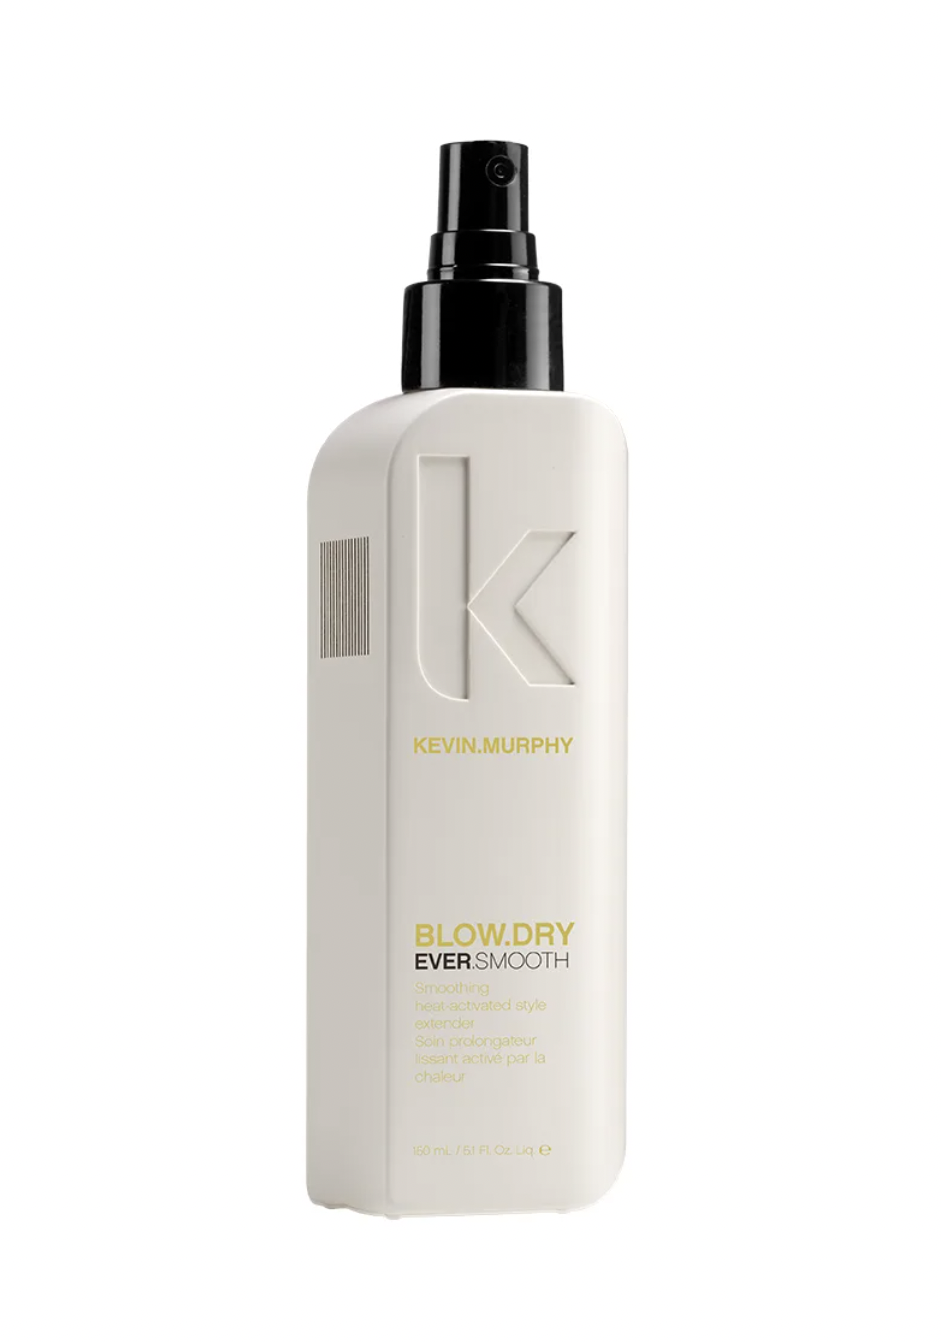 Spray cheveux Kevin Murphy Blow Dry Ever Smooth - Crème Salon